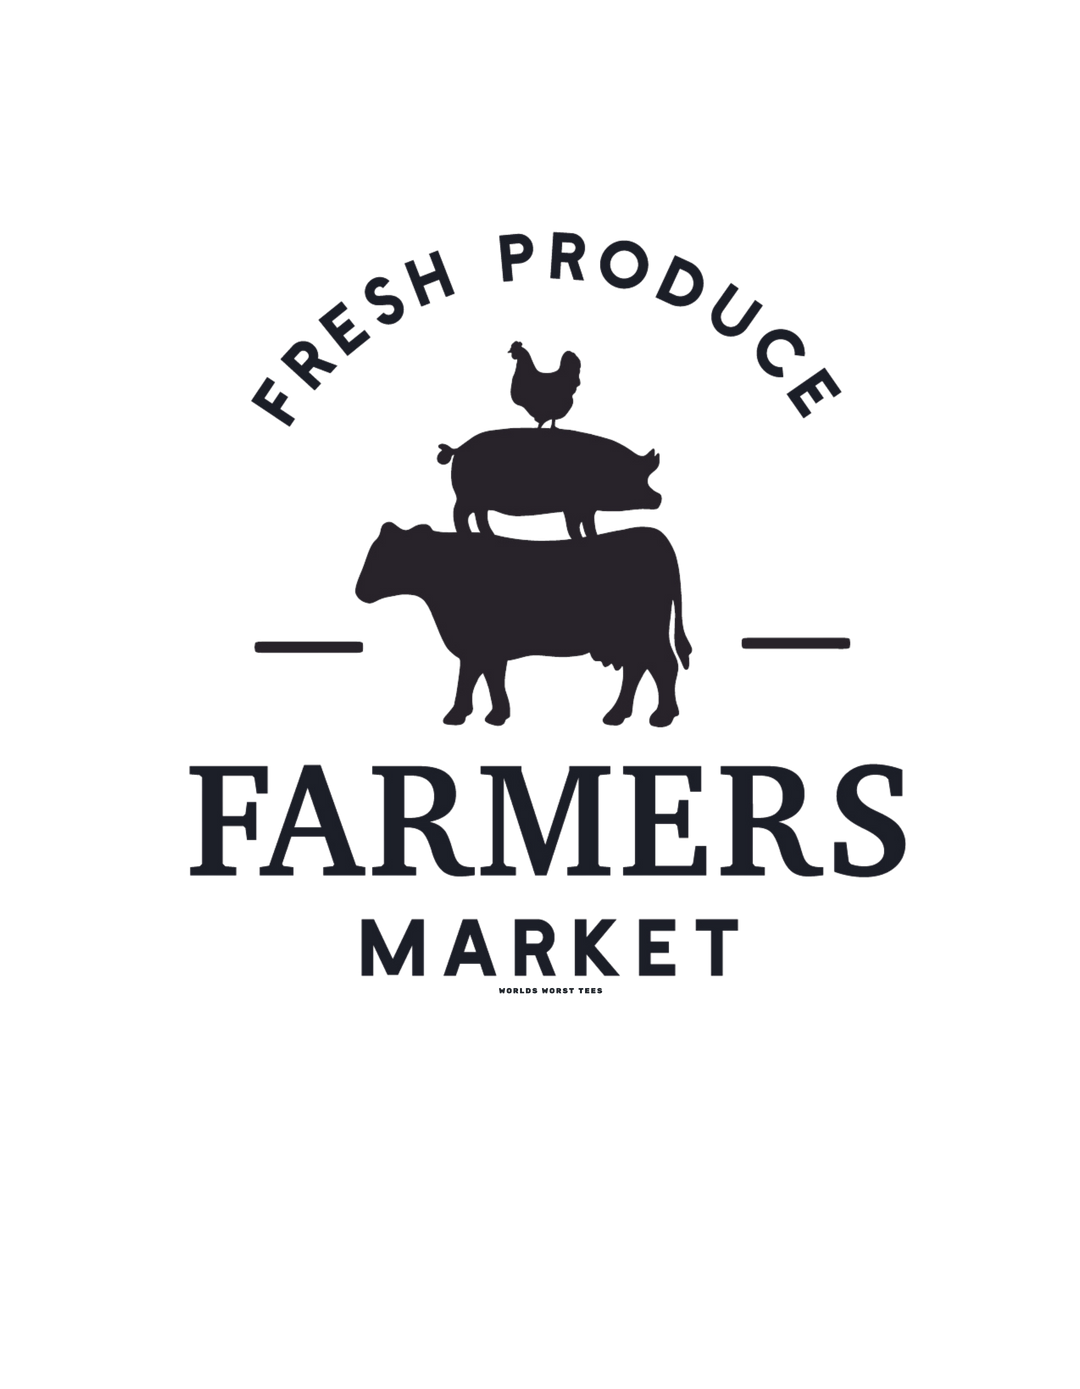 A heavy blend crewneck sweatshirt featuring a logo with animals - a chicken, pig, and cow silhouette. Ideal for comfort, made of 50% cotton and 50% polyester, with ribbed knit collar. From Worlds Worst Tees, the Farmers Market Crew.